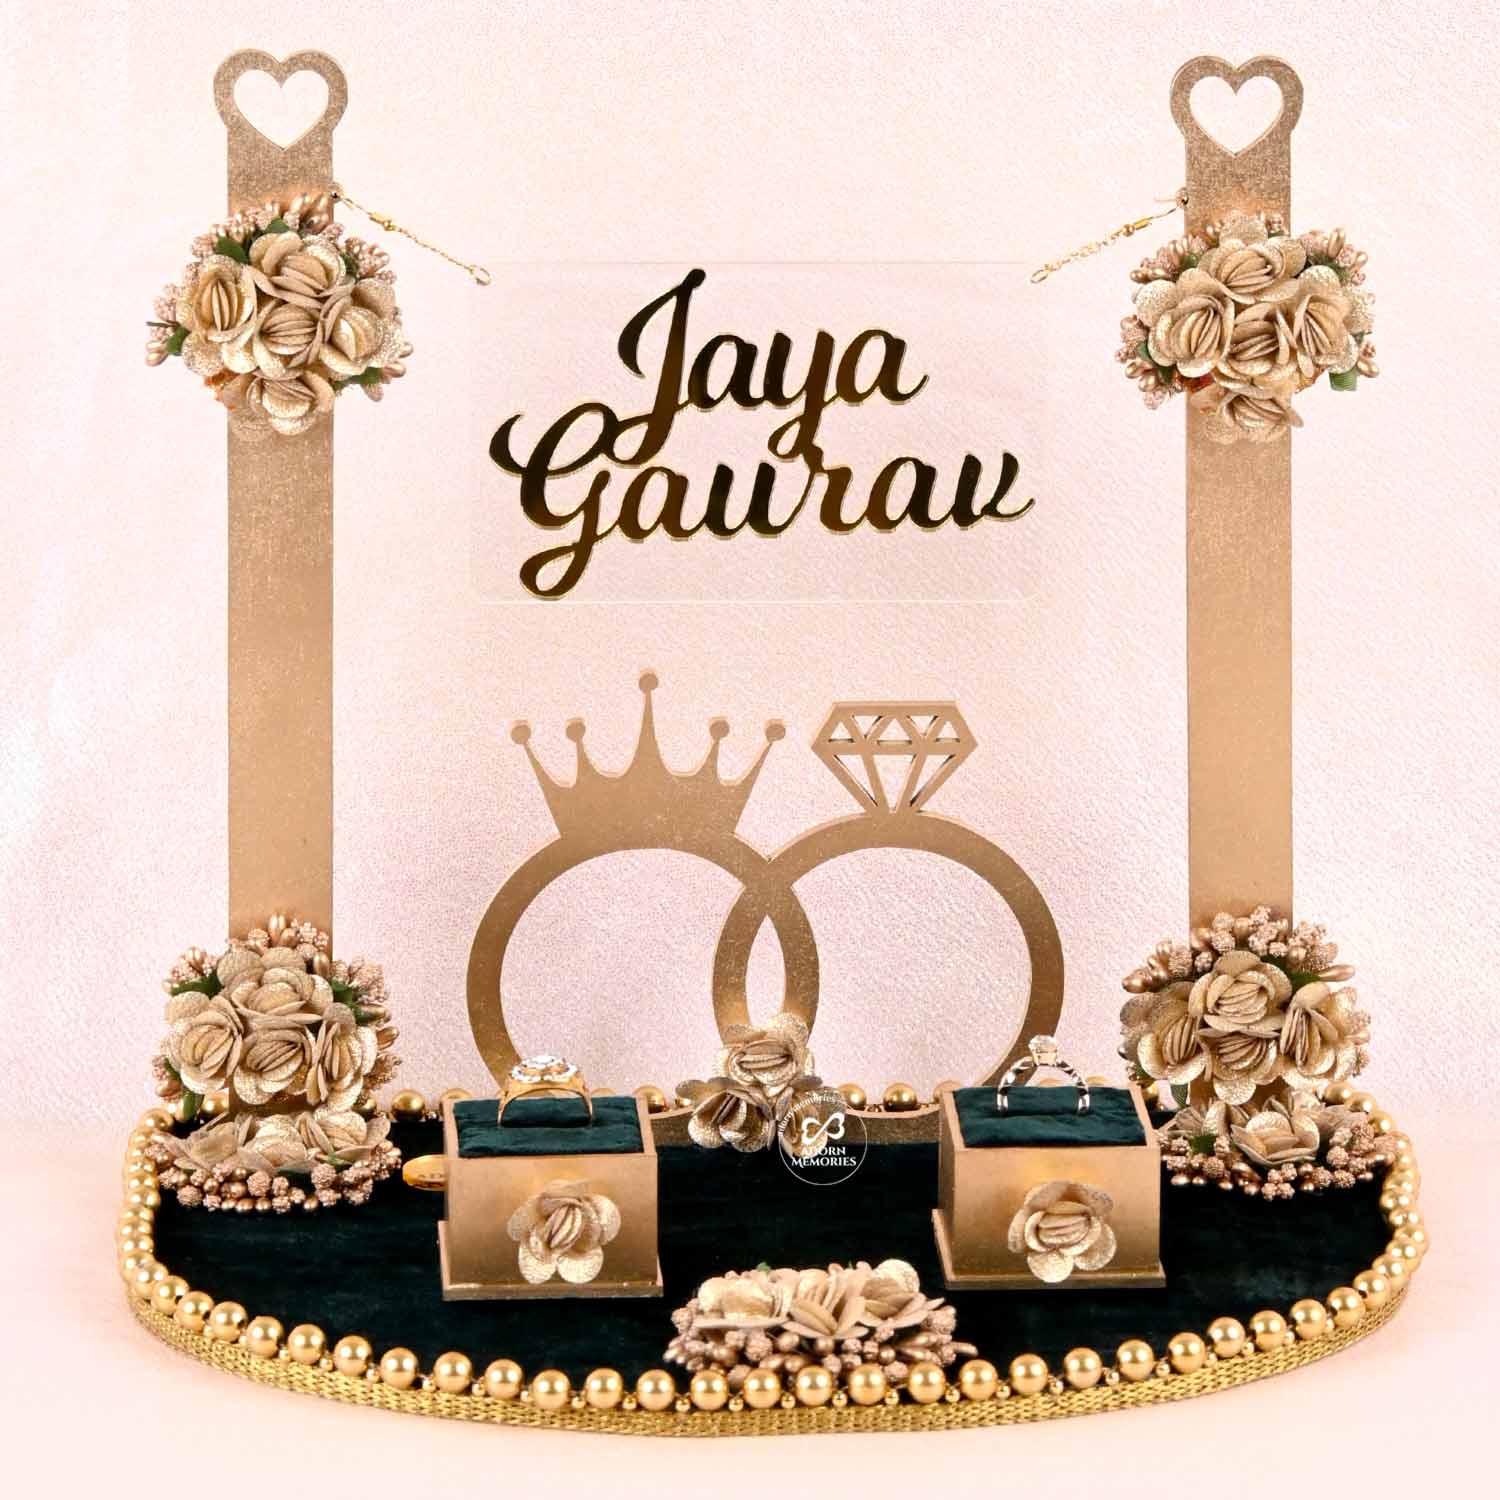 10 Engagement Ring Platter Ideas for Ring ceremony - Giftlaya Indias Best  Gifting Website